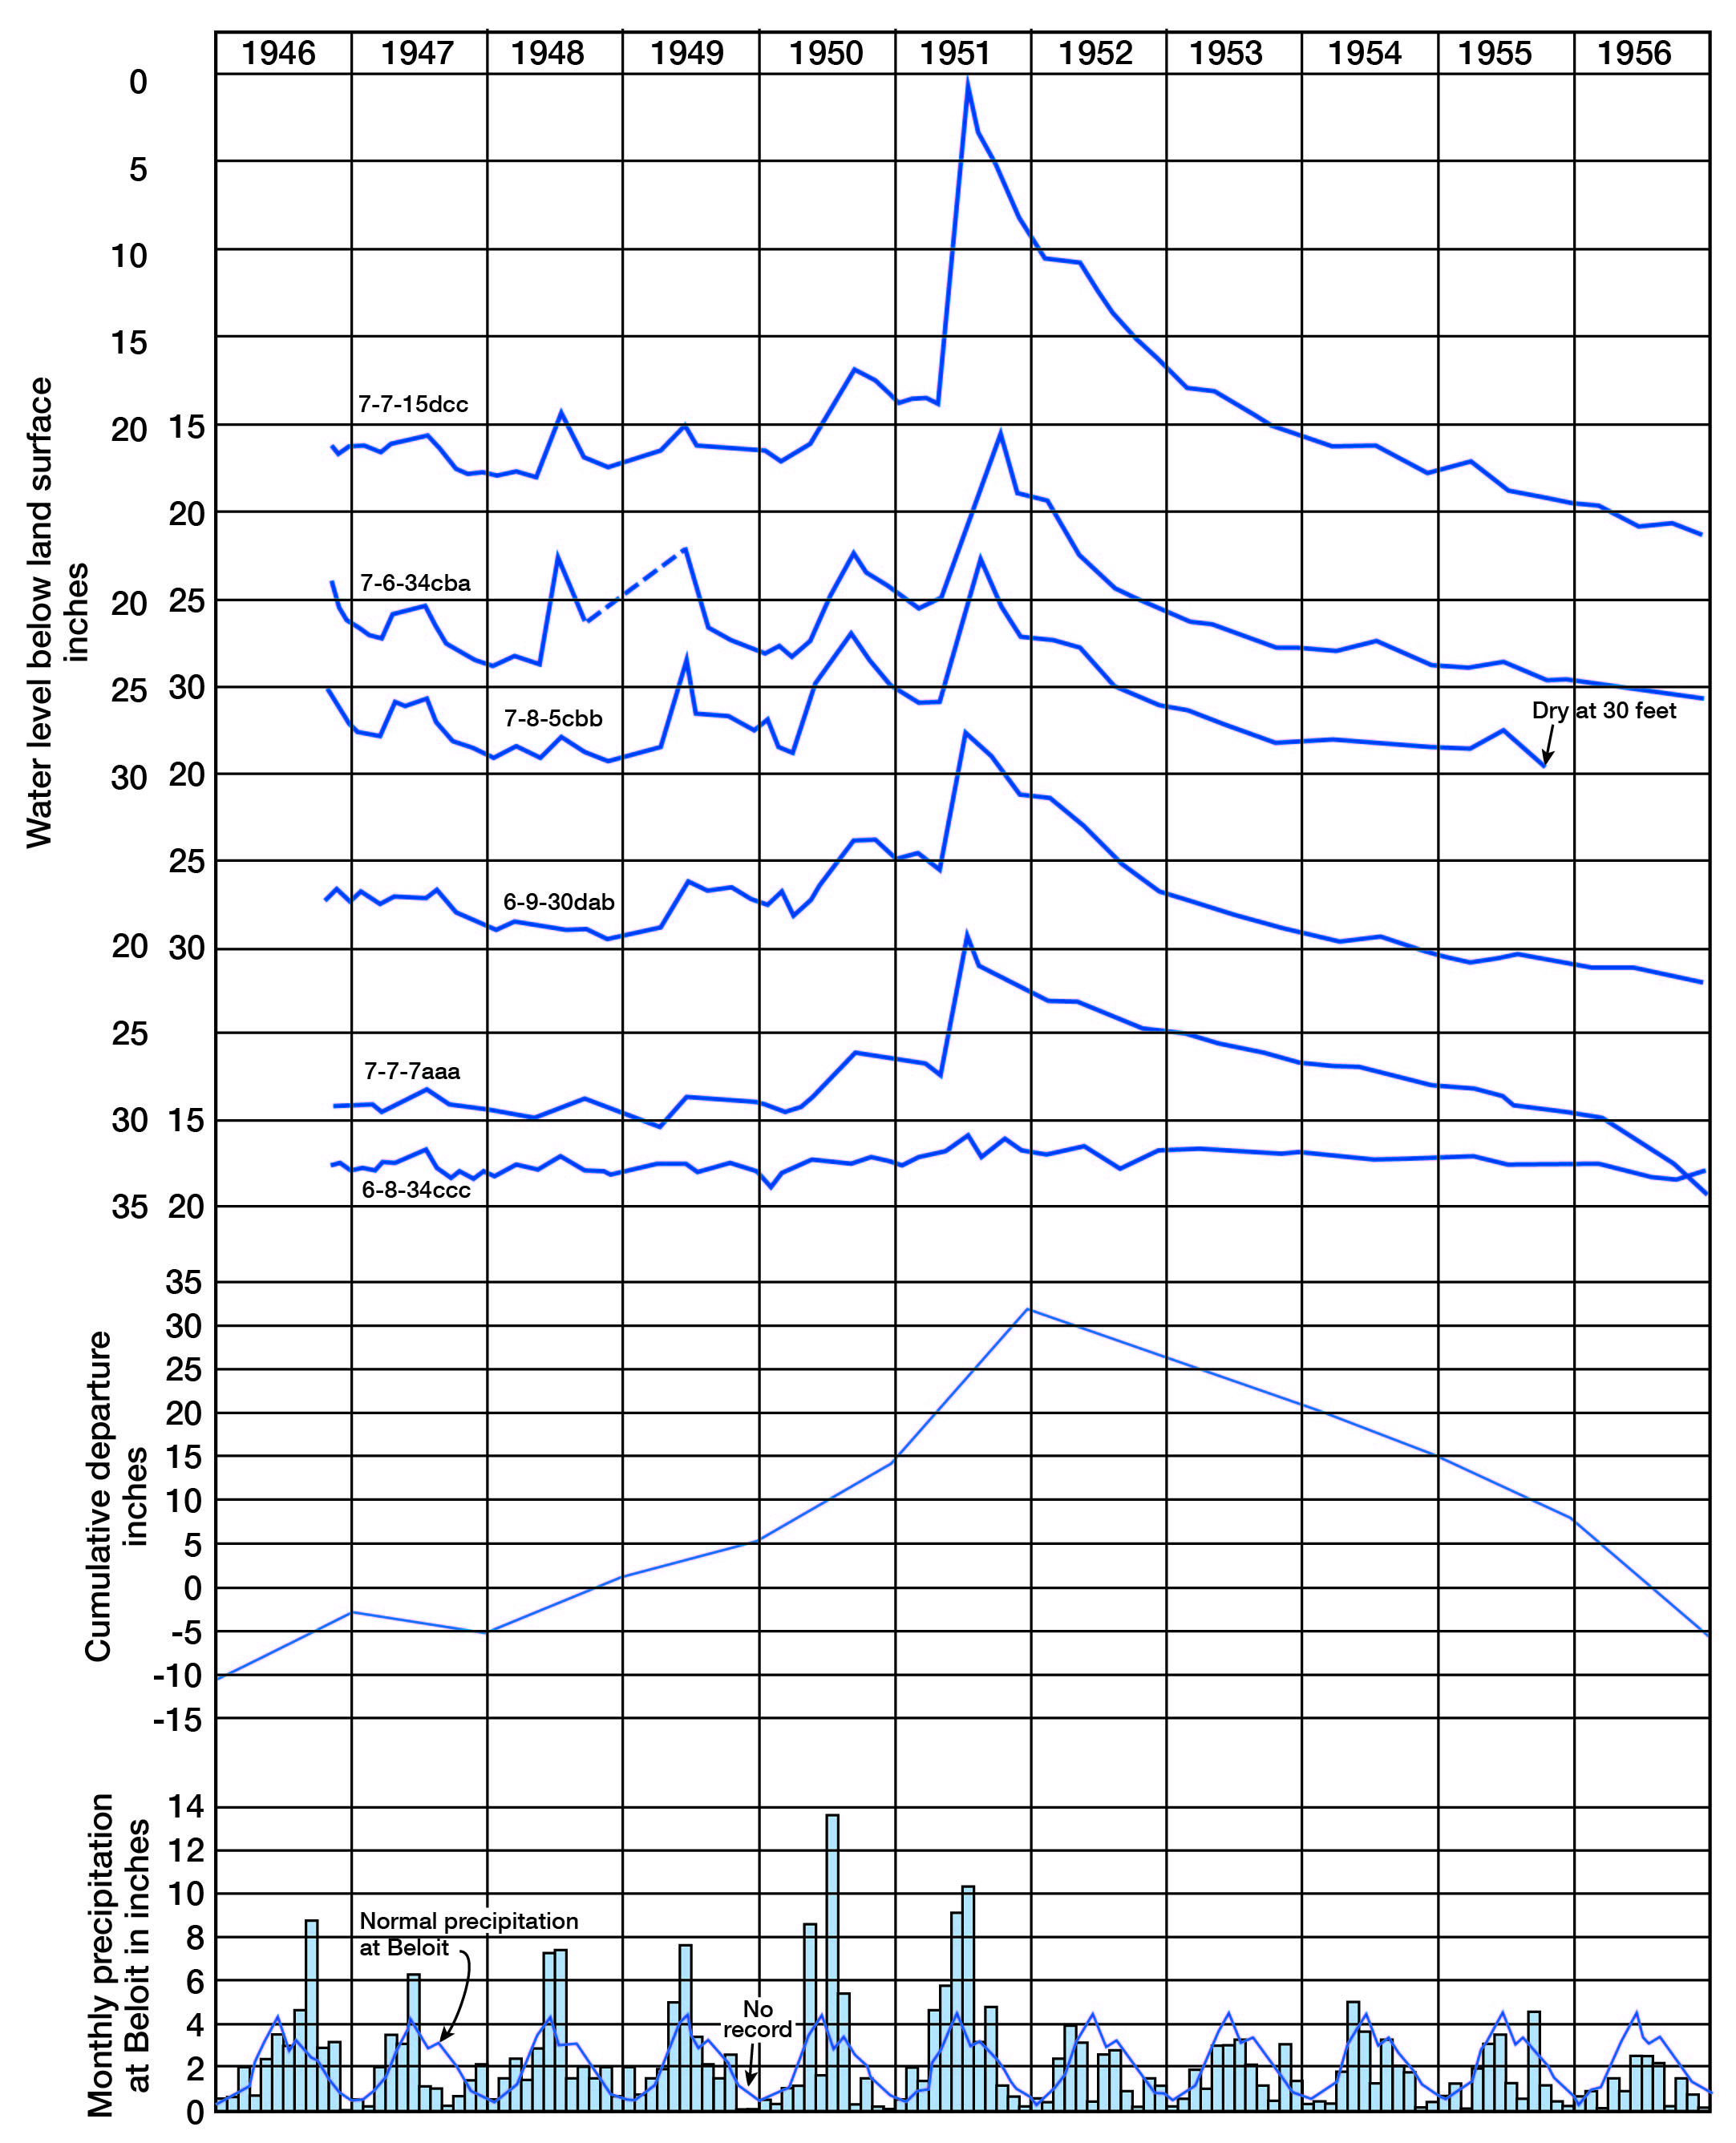 Hydrographs from 6 wells; general rise and drop in water level aligns with long-term trend in precipitation; sometimes individual spikes in water level seem to coincide with precipitation events.